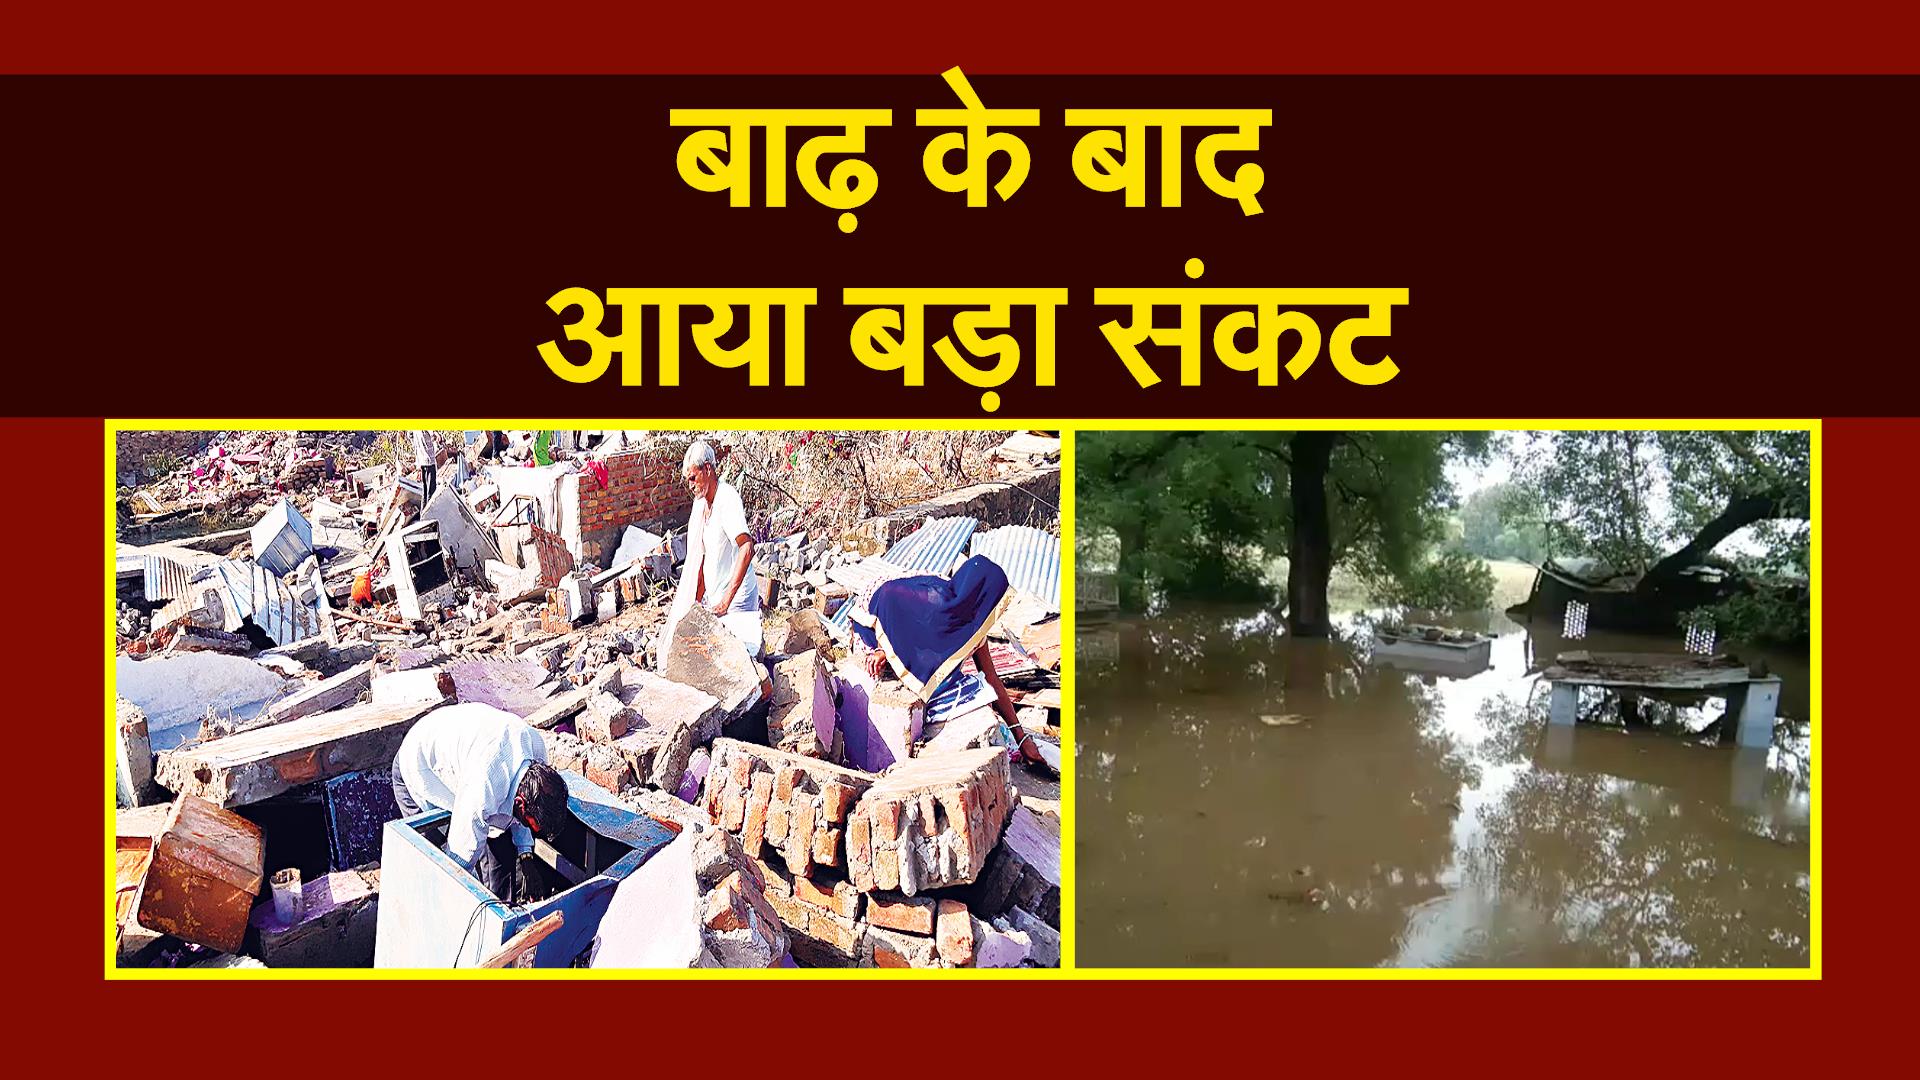 Major crisis came after flood in Rajasthan, many people reached hospit